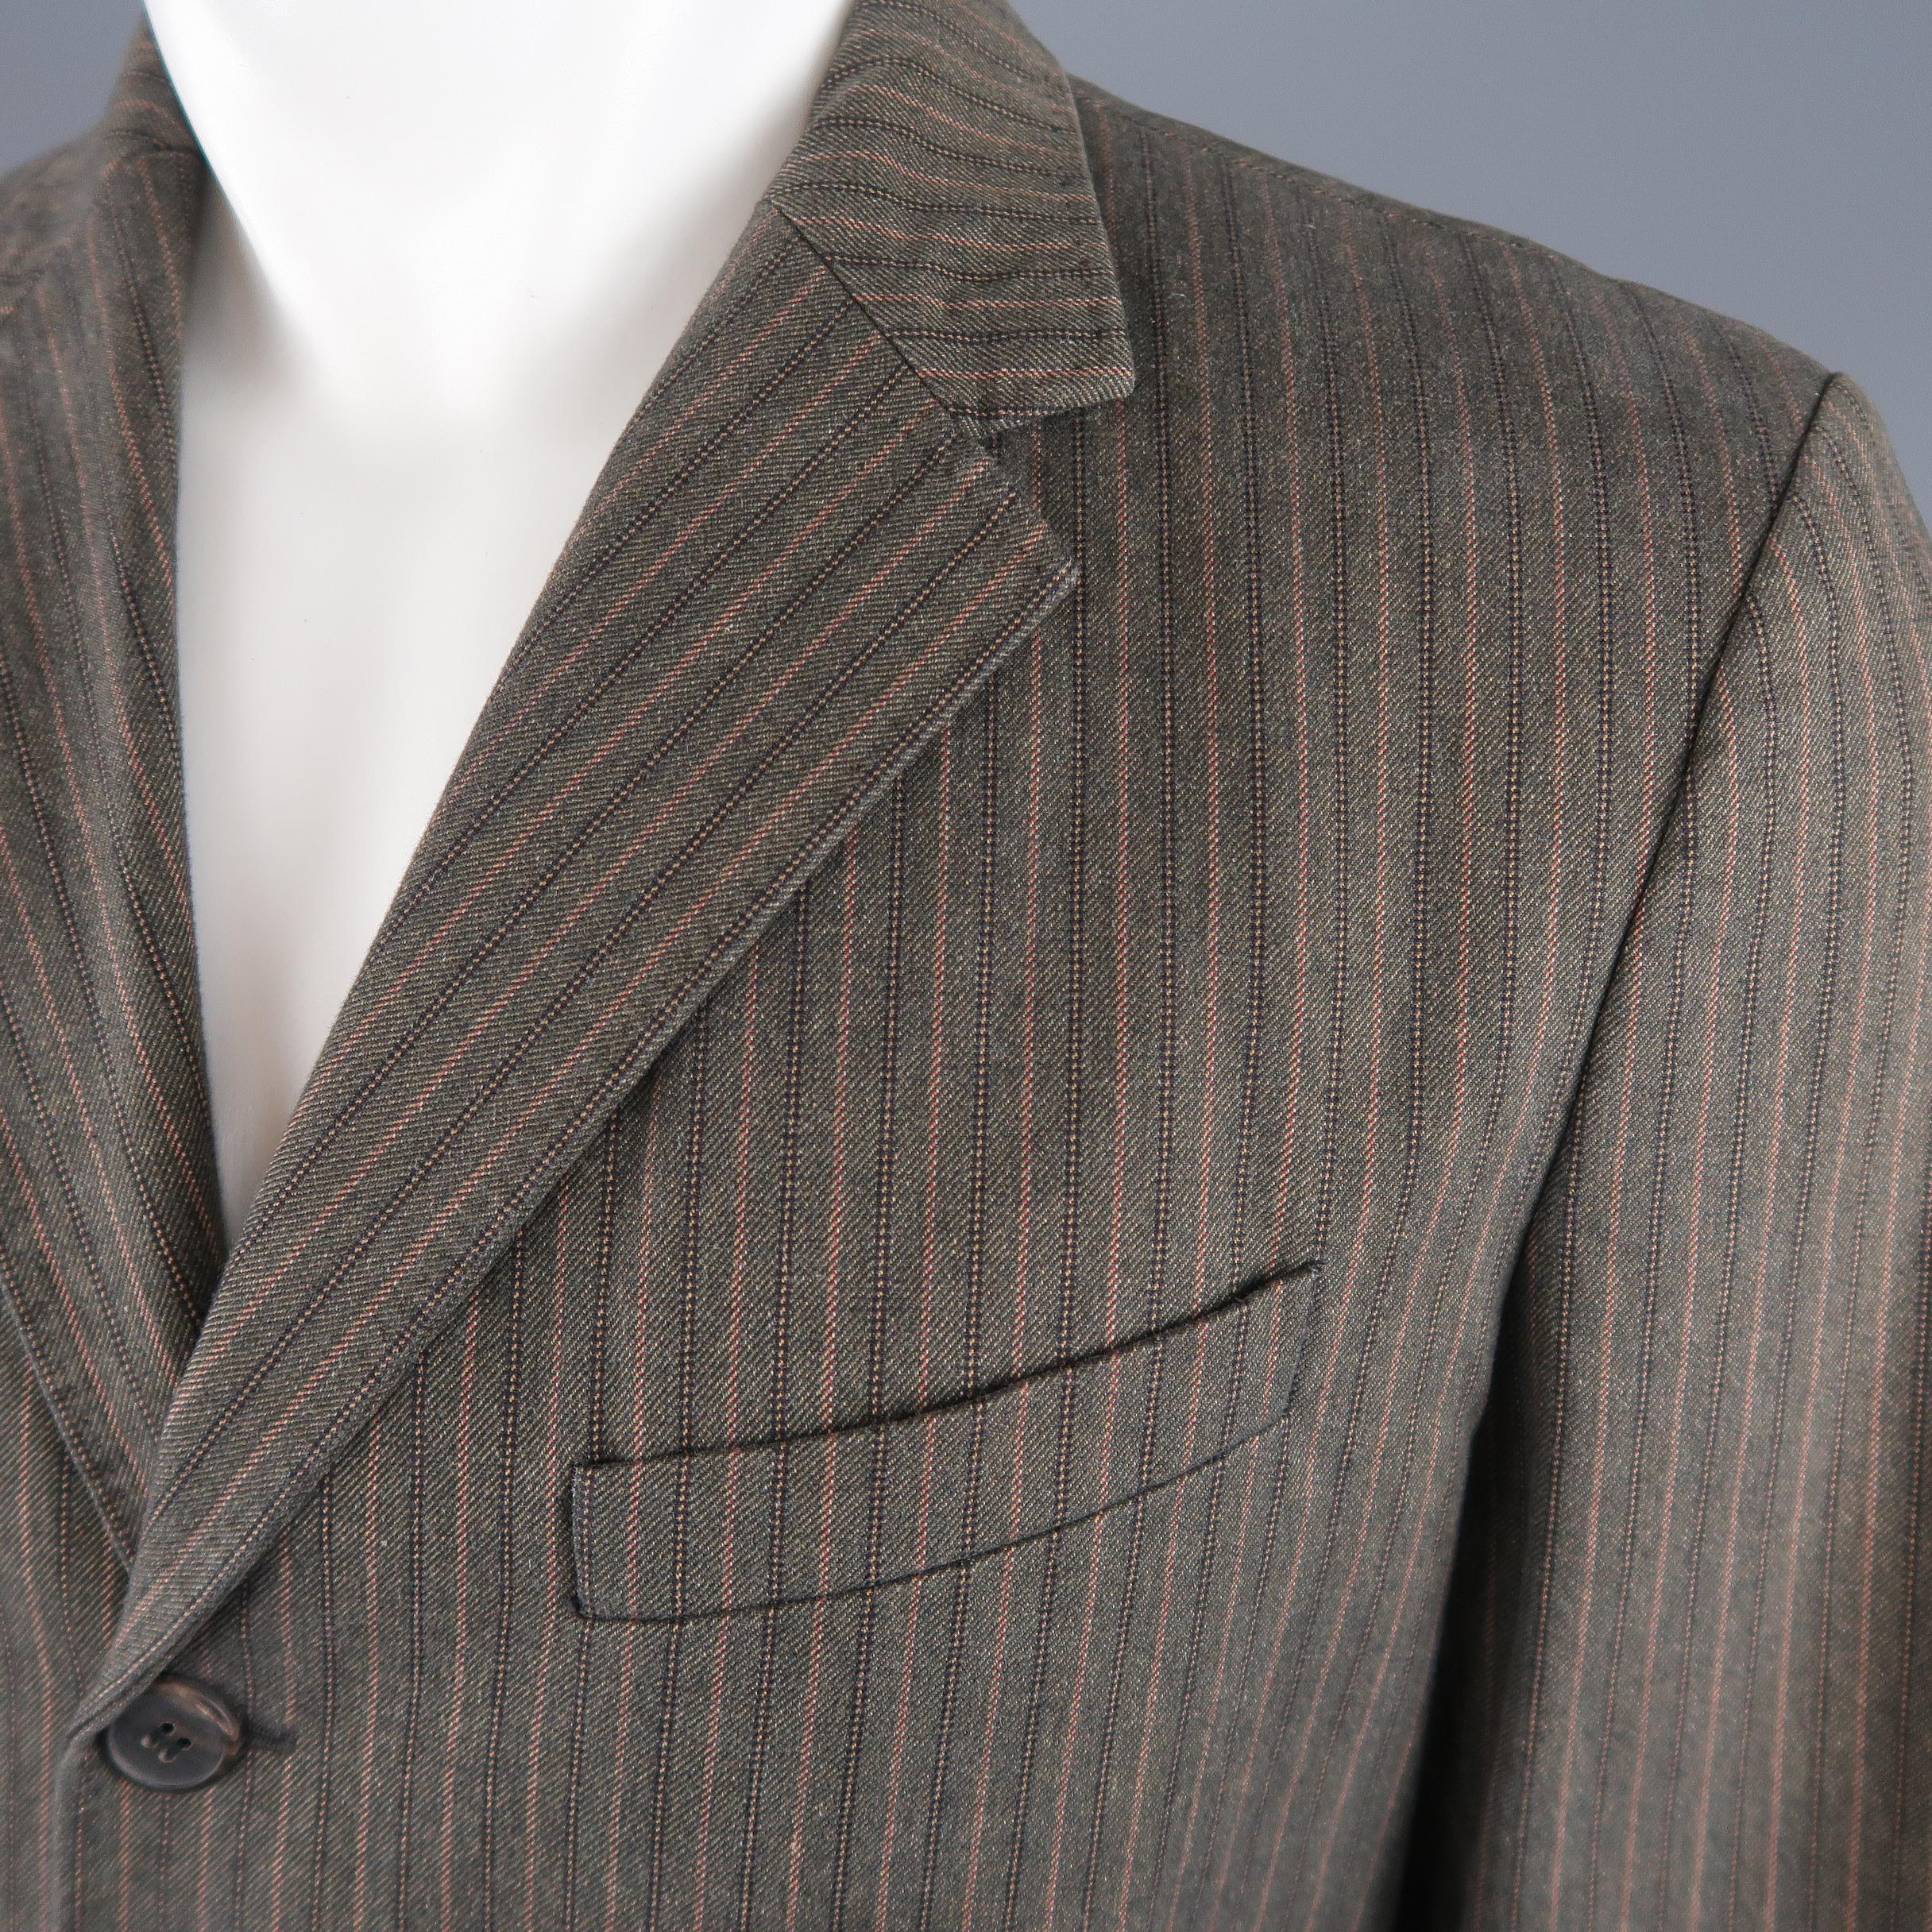 DRIES VAN NOTEN sport coat comes in taupe brown striped herringbone cotton with a notch lapel, three button single breasted front, and flap pockets. Made in Belgium.
 
Excellent Pre-Owned Condition.
Marked: IT 48
 
Measurements:
 
Shoulder: 18